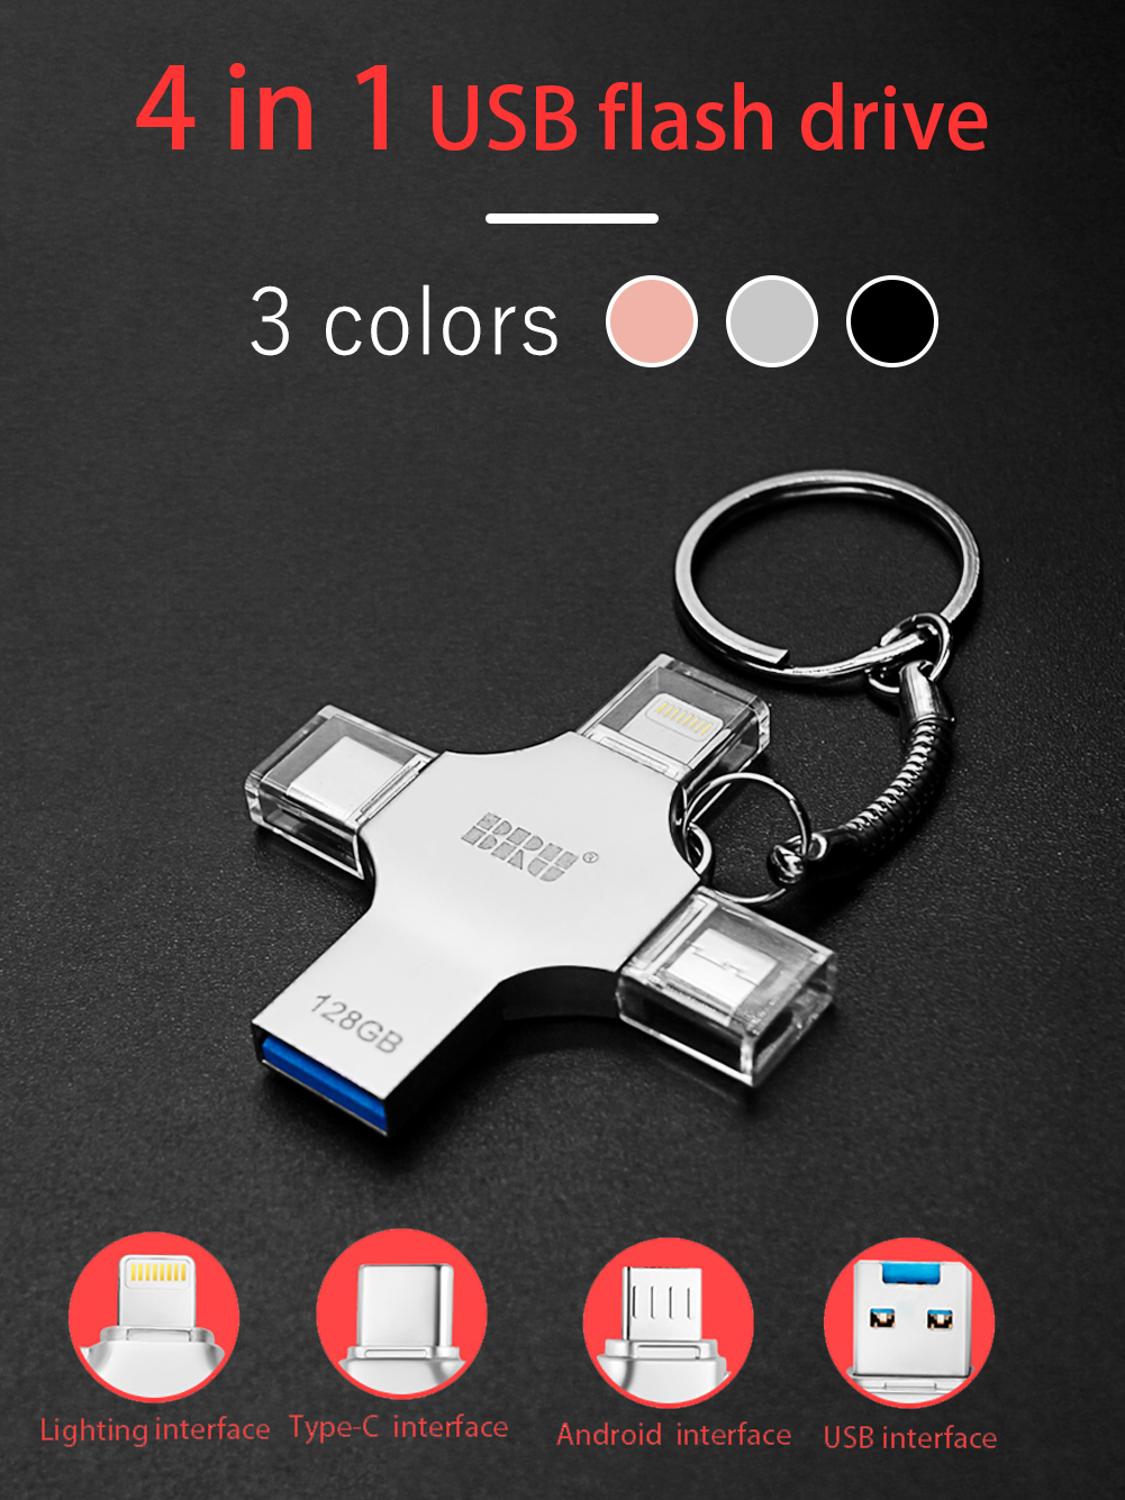 easily accessible 4 in 1 USB Flash Drive